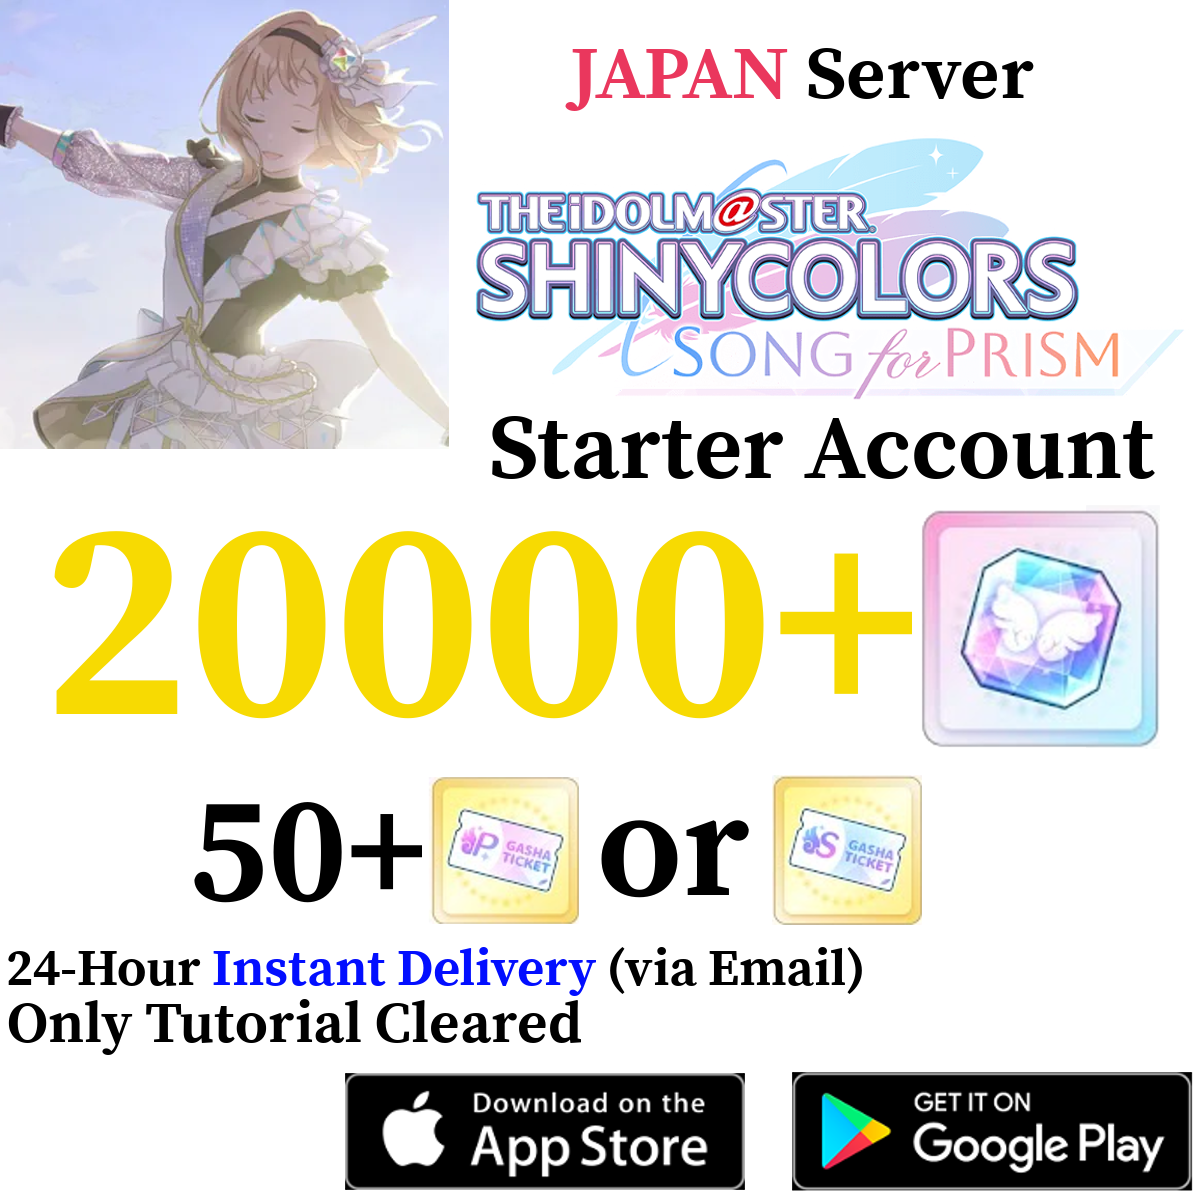 [JP] [INSTANT] (BUY 2 GET 3) 20000+ Gems | Idolmaster Shiny Colors Song for Prism Shanison Shinymas iDOLM@STER Reroll Starter Account